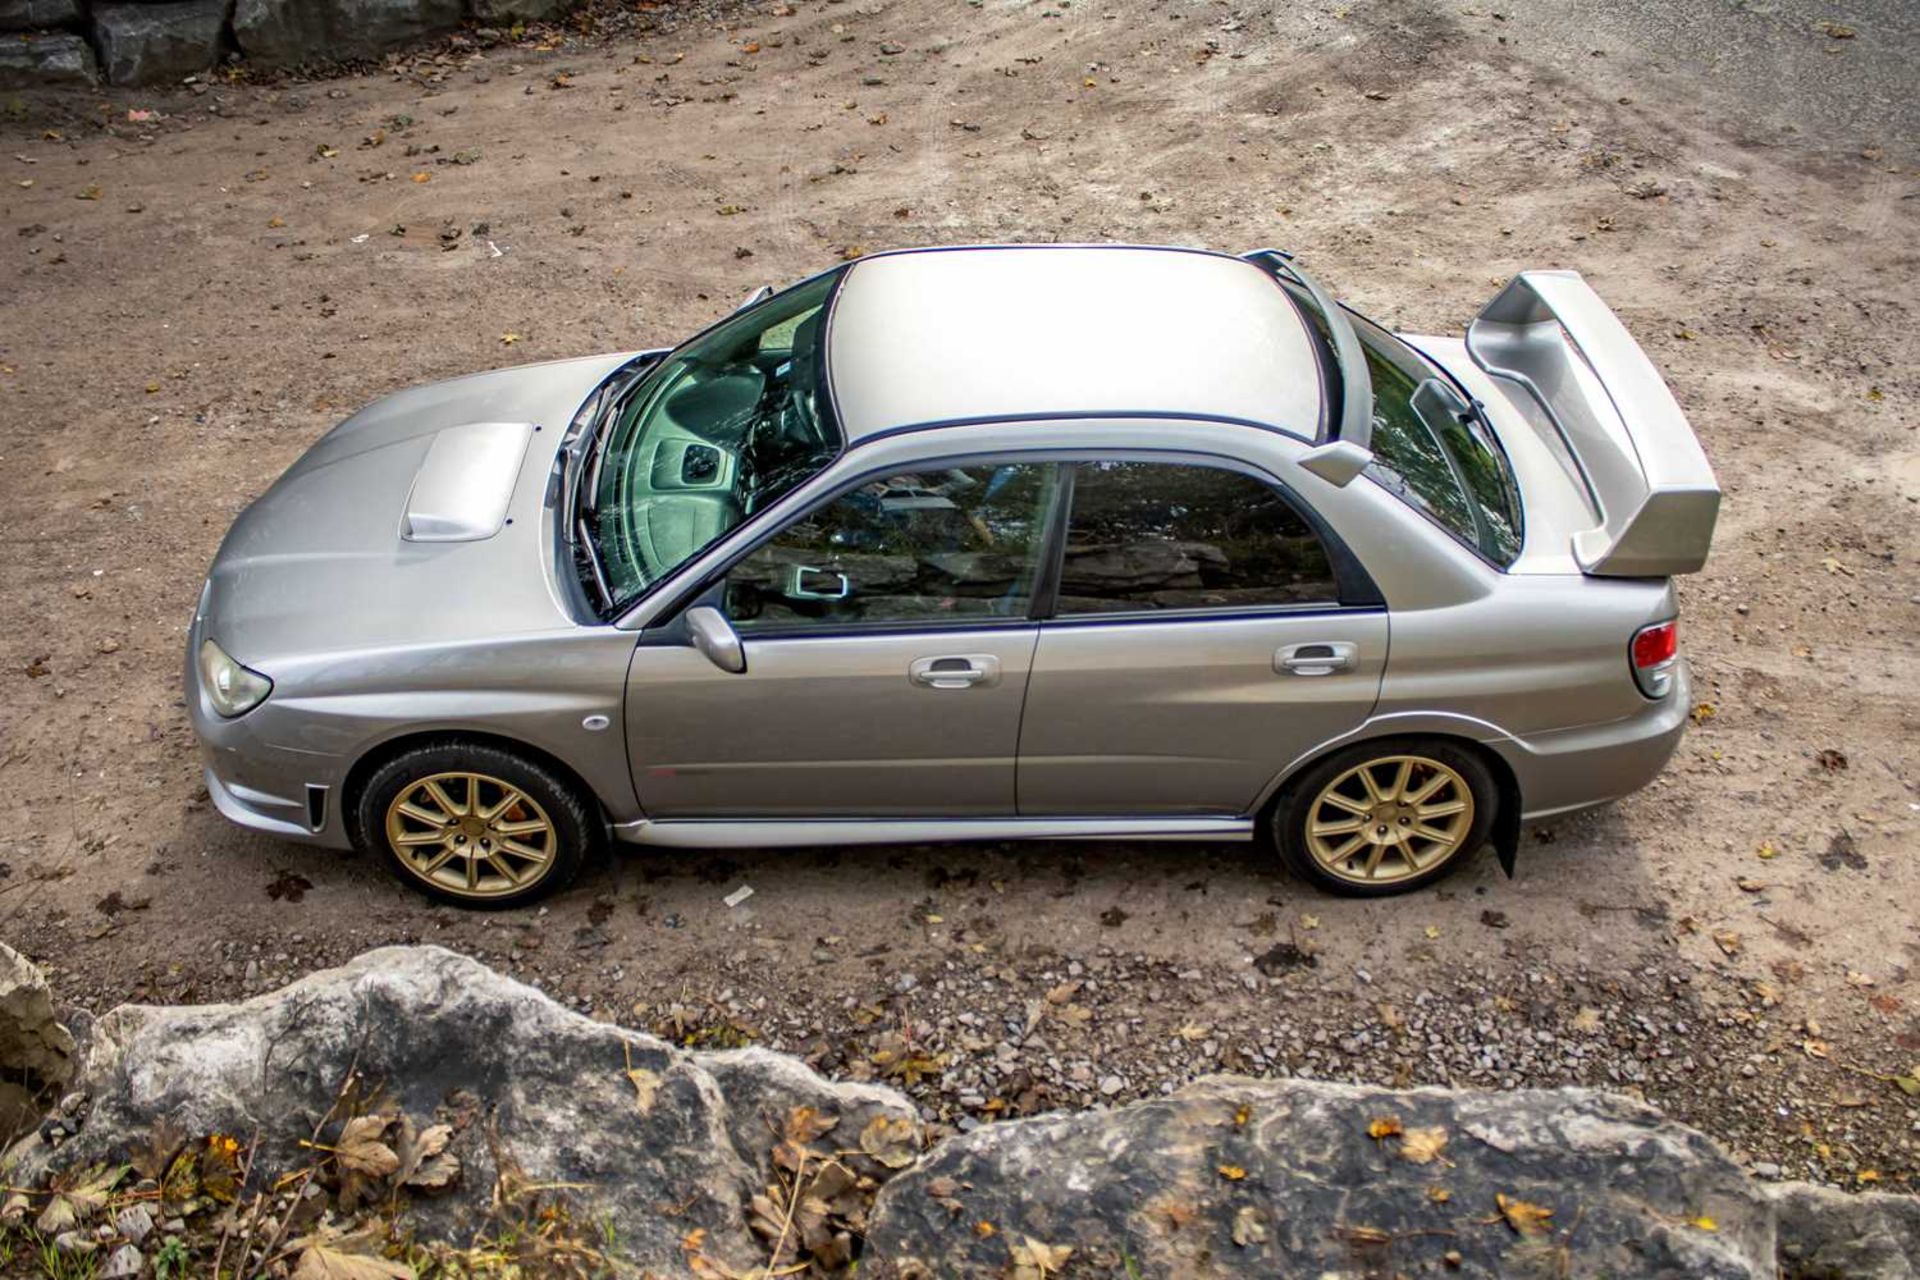 2006 Subaru Impreza WRX STi Featuring a plethora of desirable upgrades, supported by a dyno printout - Image 9 of 103